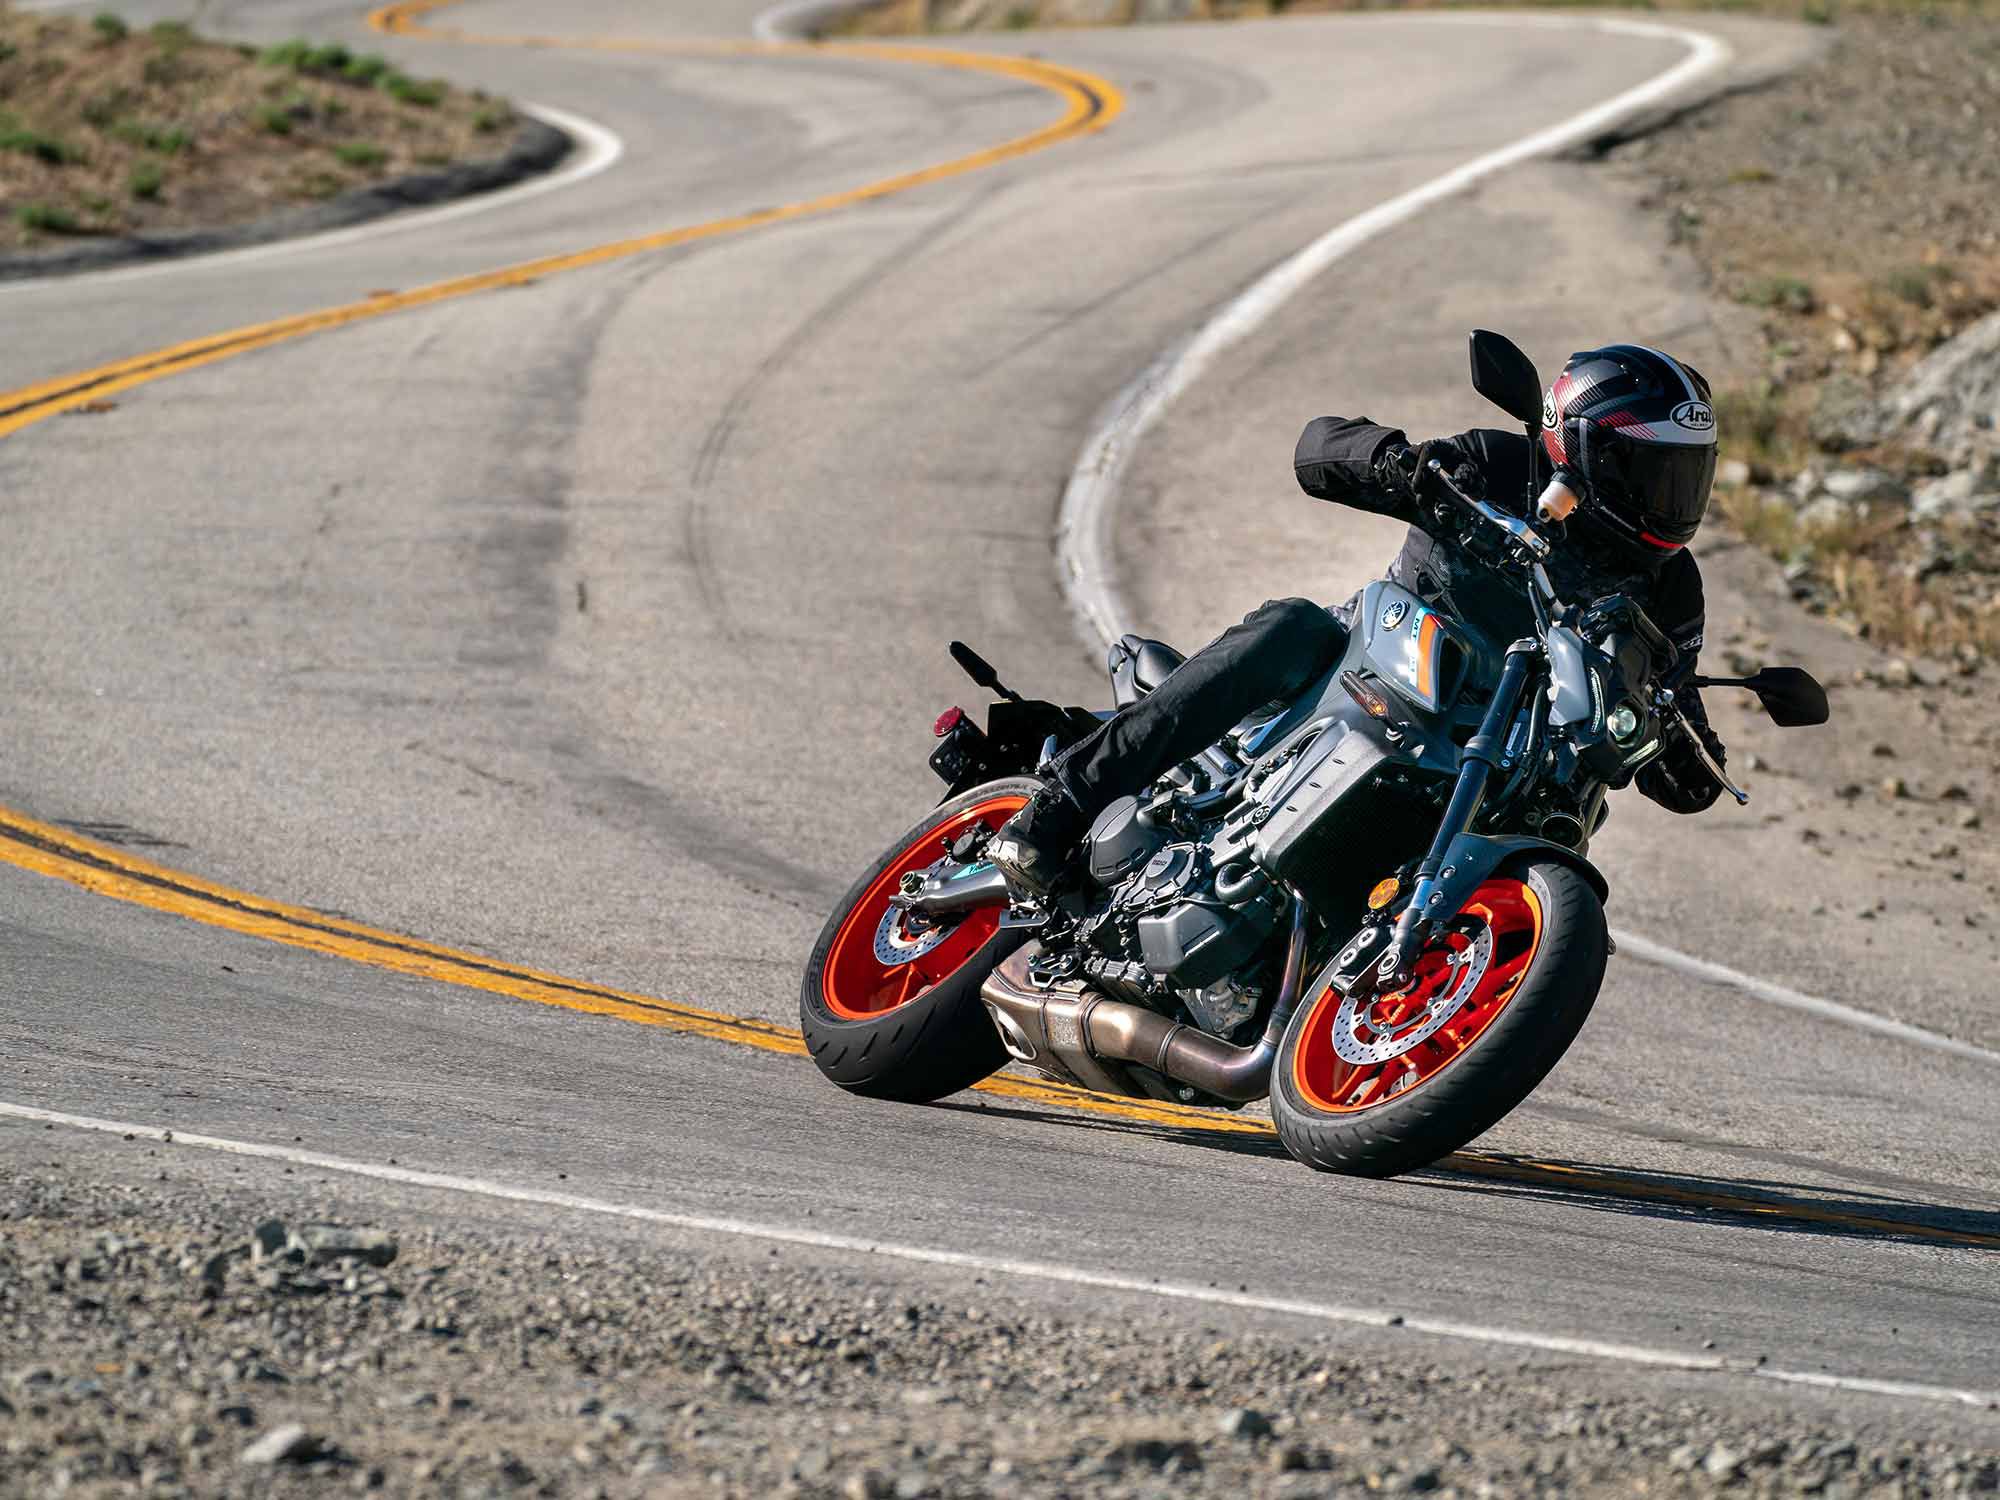 Yamaha’s naked bike is a hoot to ride at speed. The wiggle-wobble handling is a thing of the past and the chassis offers elevated road holding.